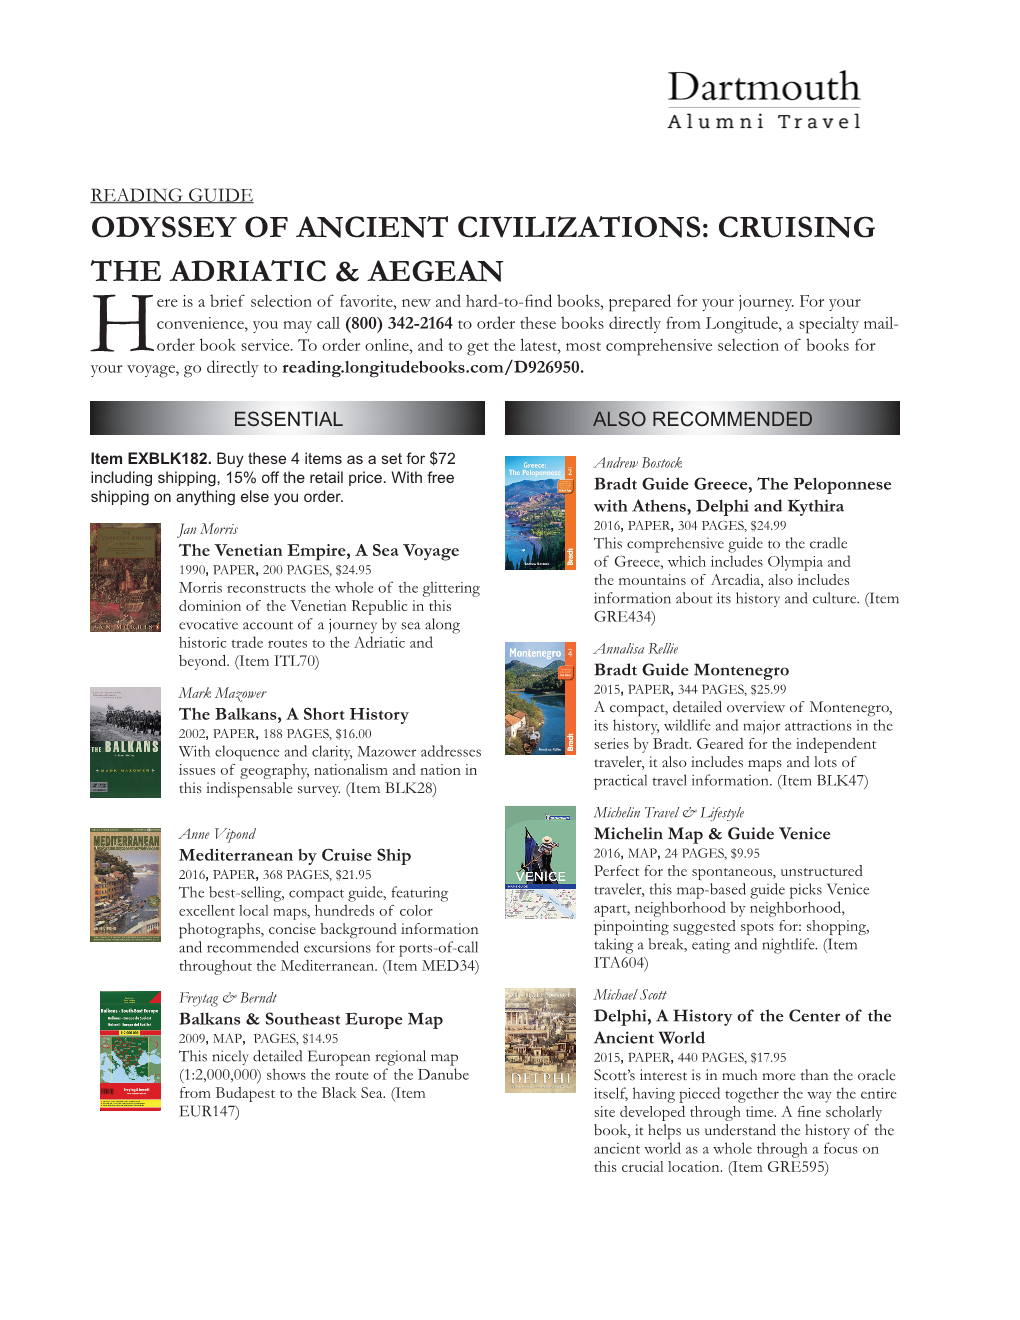 ODYSSEY of ANCIENT CIVILIZATIONS: CRUISING the ADRIATIC & AEGEAN Ere Is a Brief Selection of Favorite, New and Hard-To-Find Books, Prepared for Your Journey